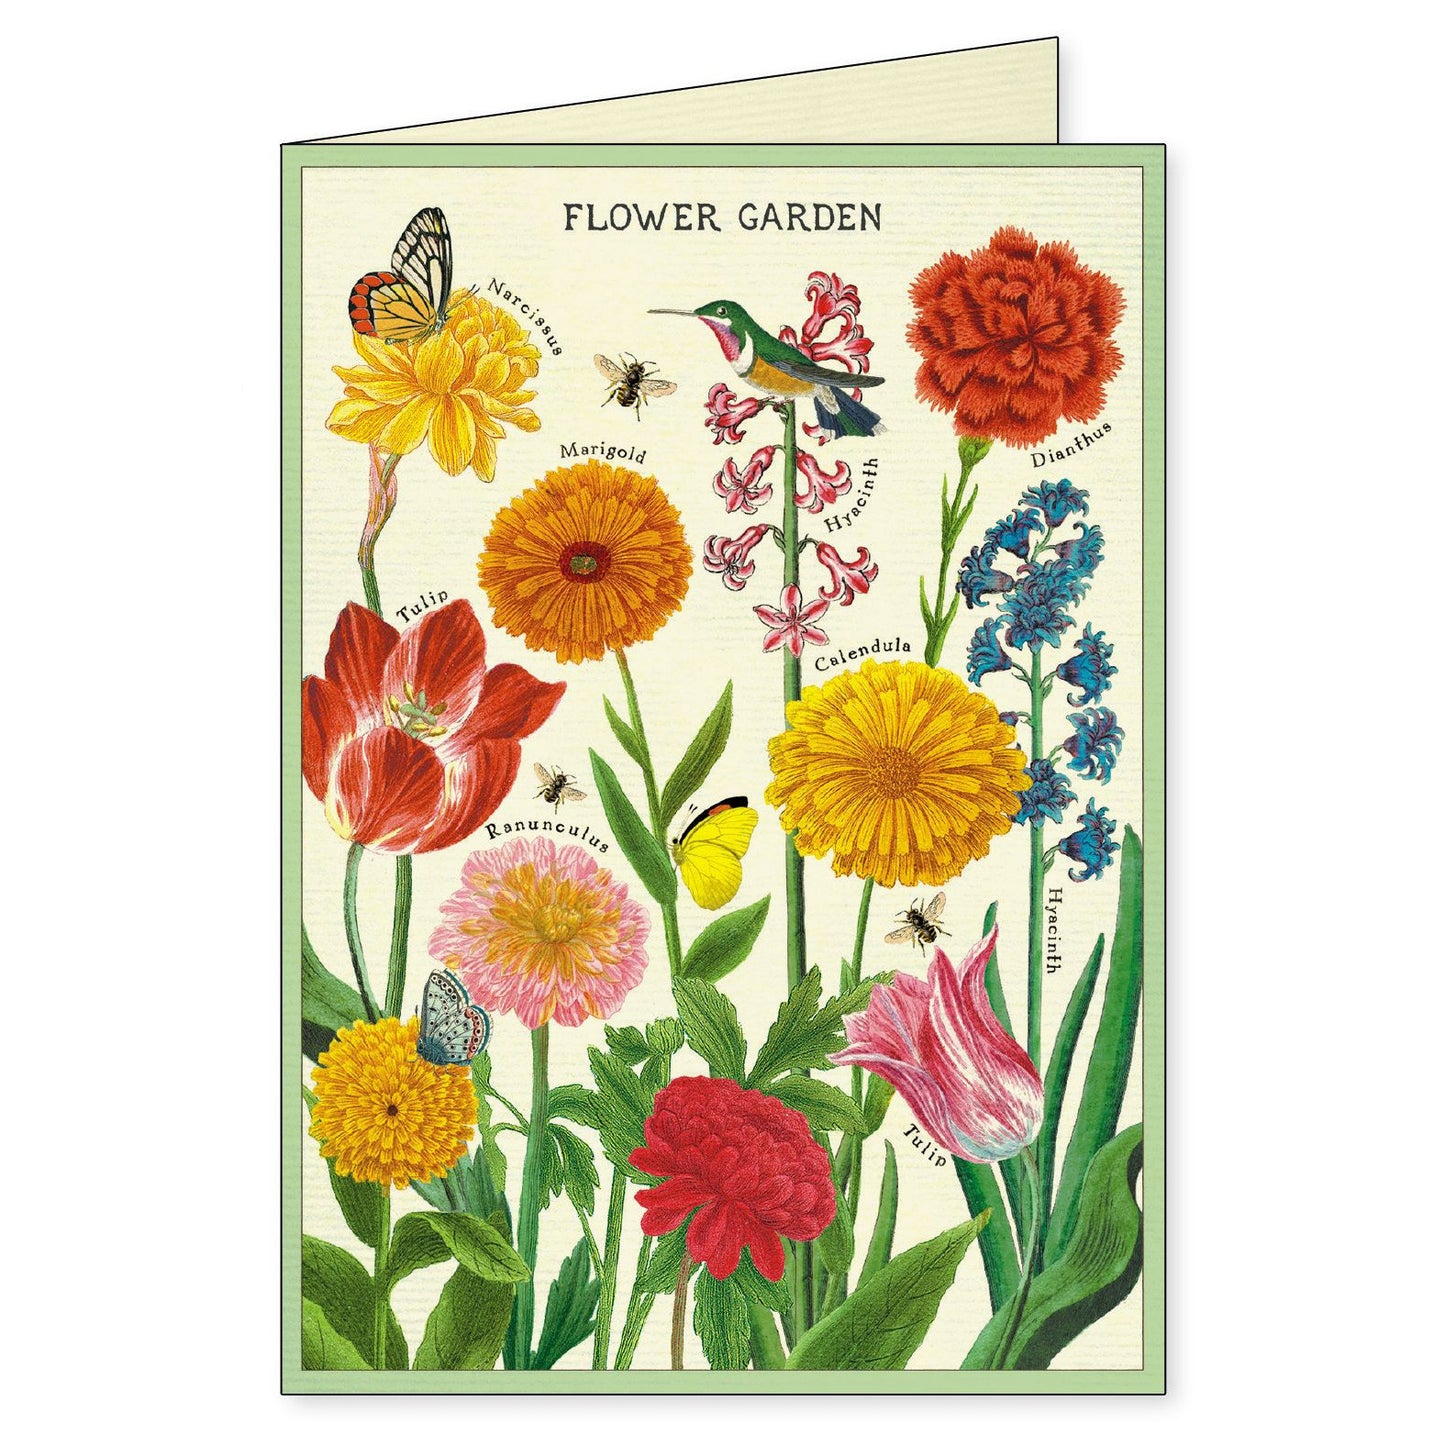 Cavallini & Co. Boxed Note Cards - Gardening